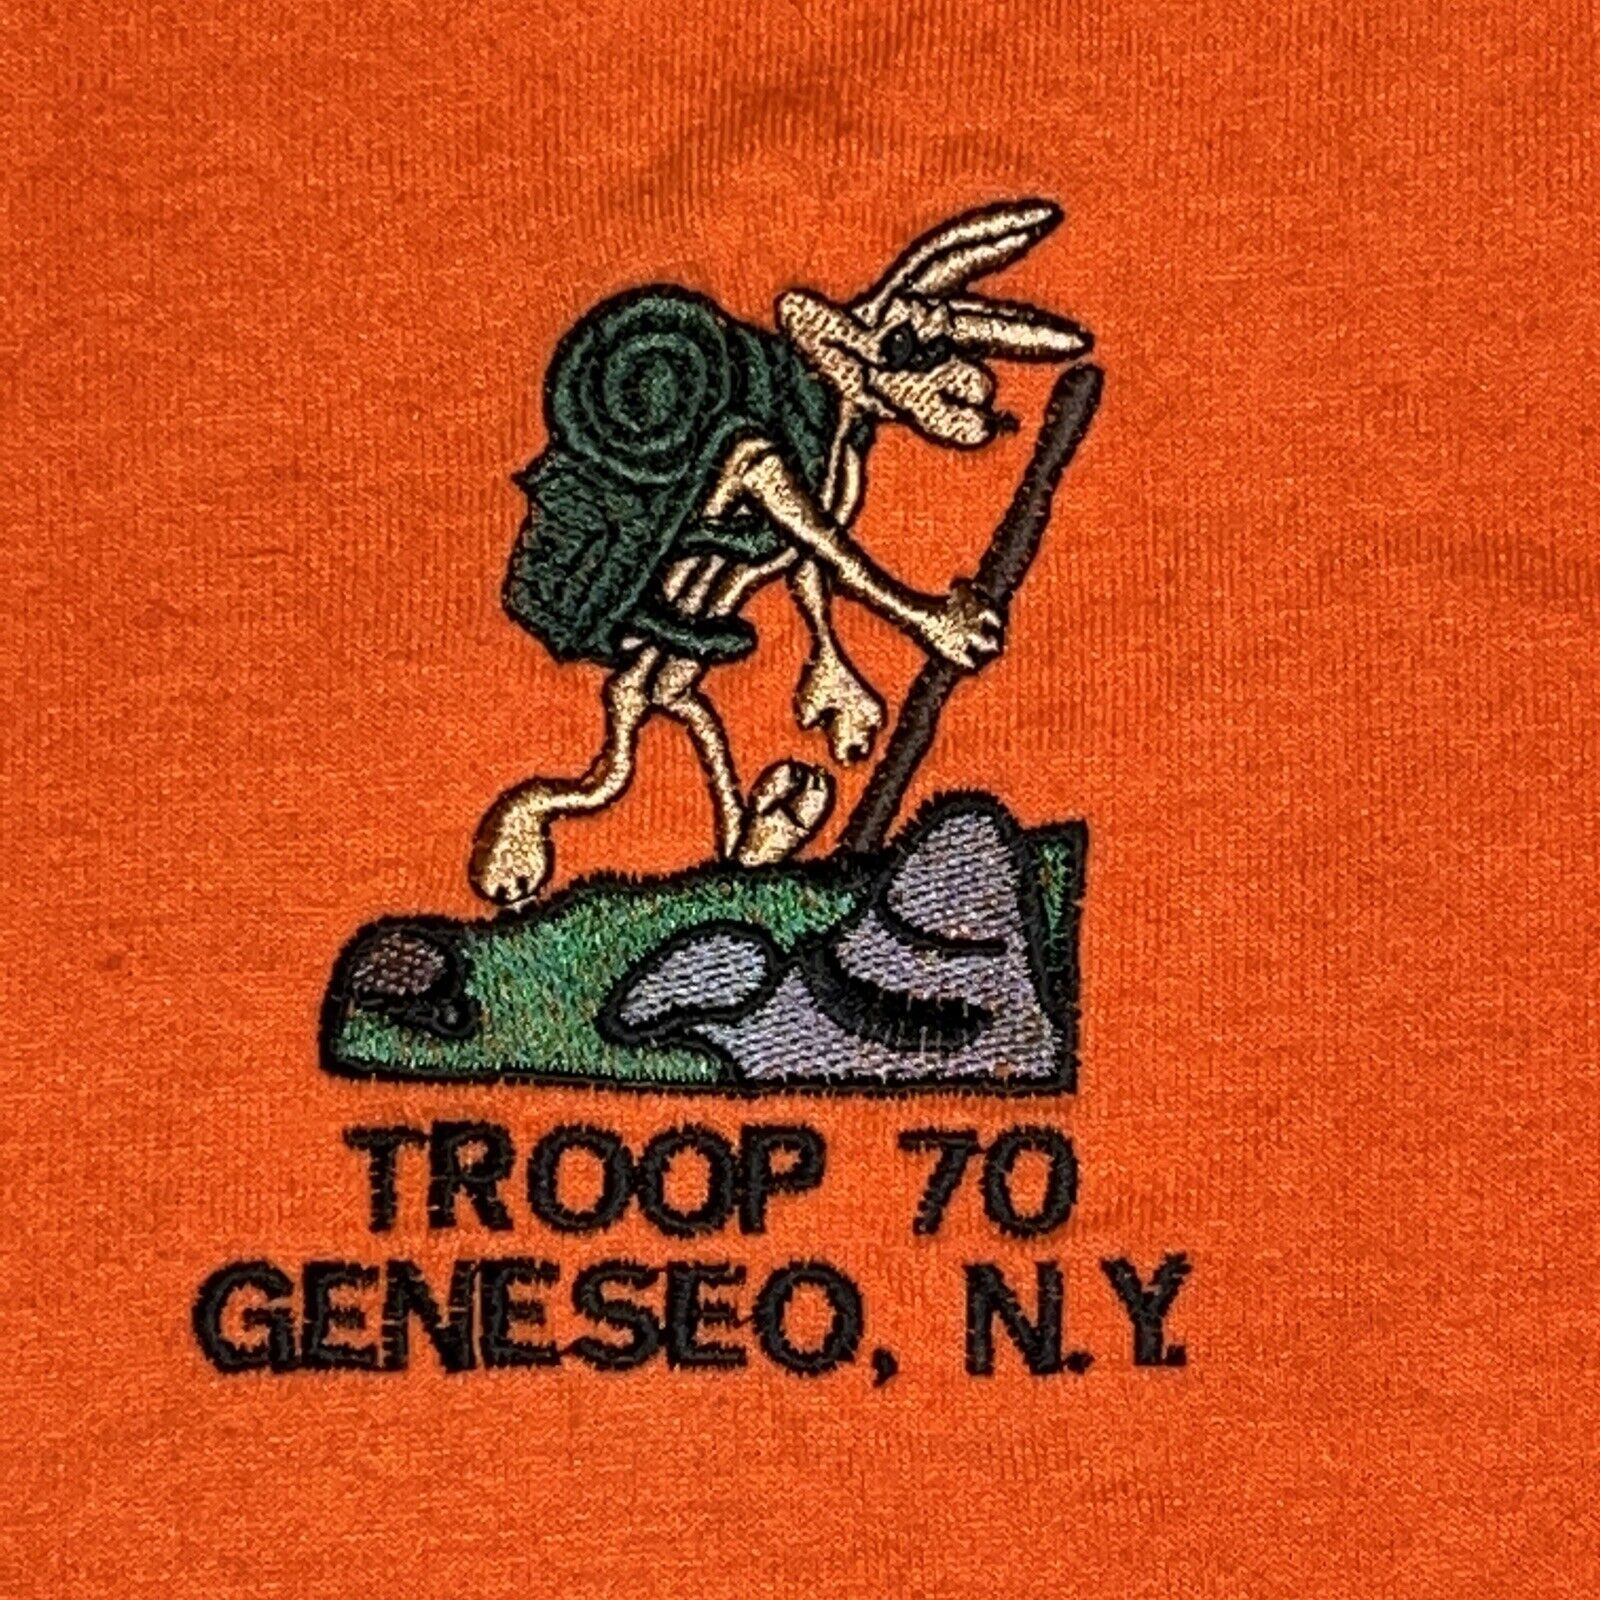 BSA T-Shirt Troop 70 Geneseo NY Boy Scouts Embroidered Coyote Orange Size Large